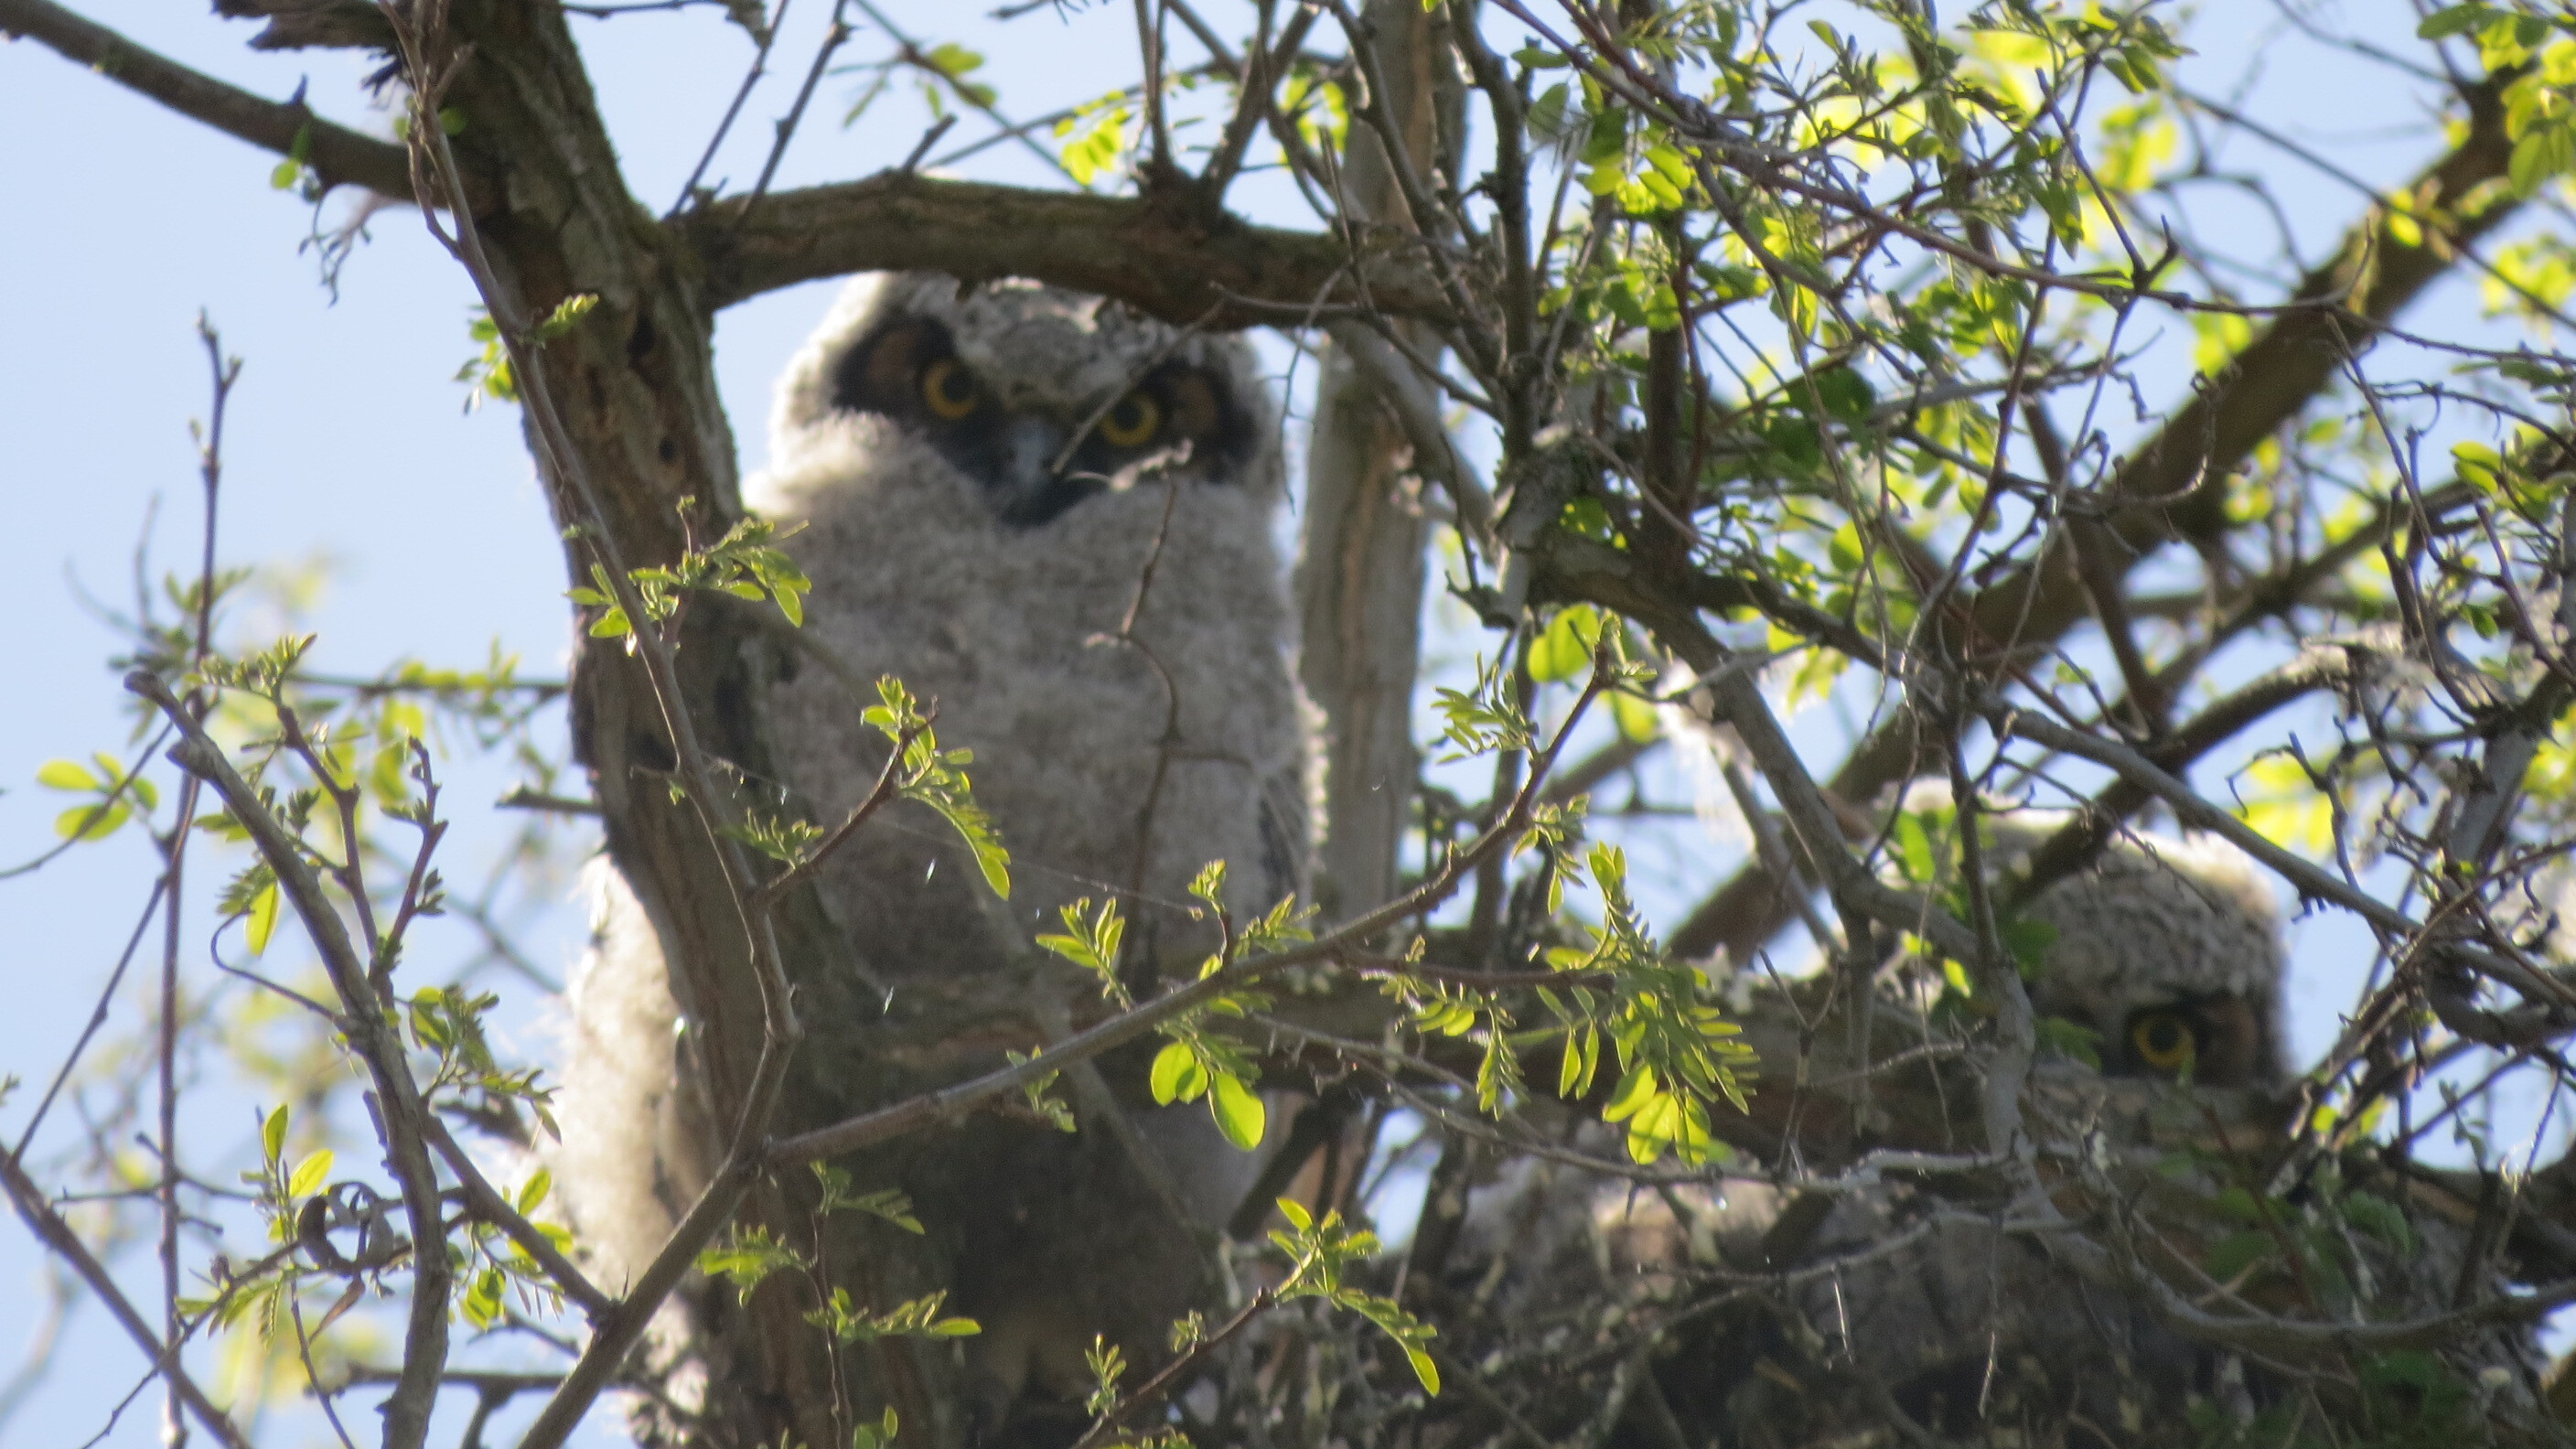 In the photo are two owlets with dark faces and white fluffy bodies. One is perched near the center of the photo looking down down towards the photo, the other is to its right lower in their nest, looking to the right. Tree branches with small light green leaves surround them and a blue-grey sky is the background.